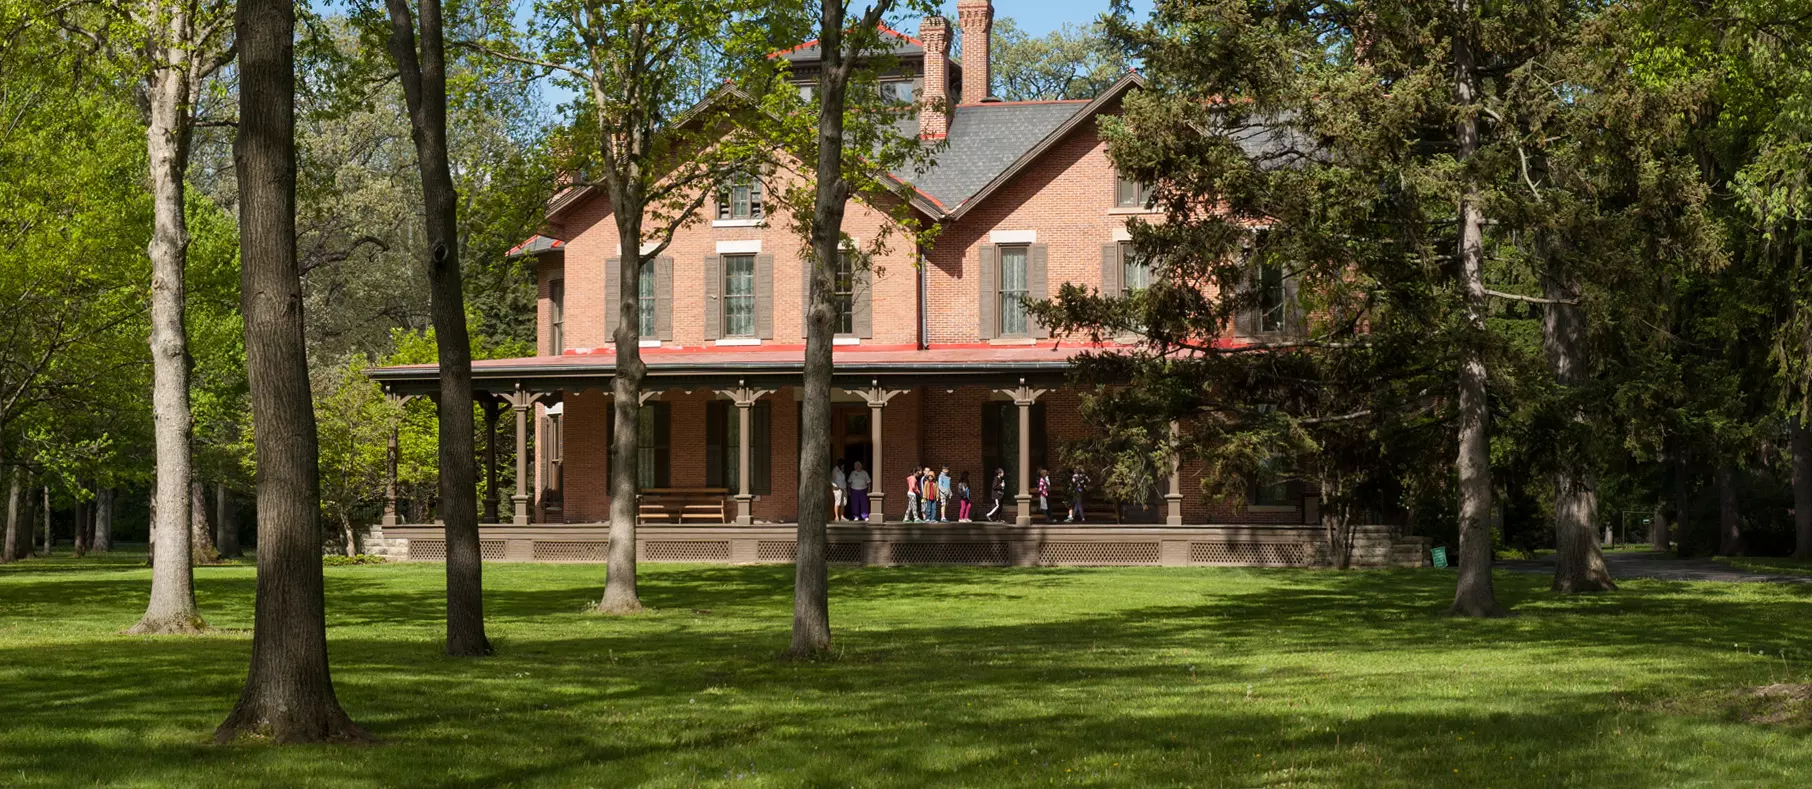 Rutherford B. Hayes Presidential Library & Museums